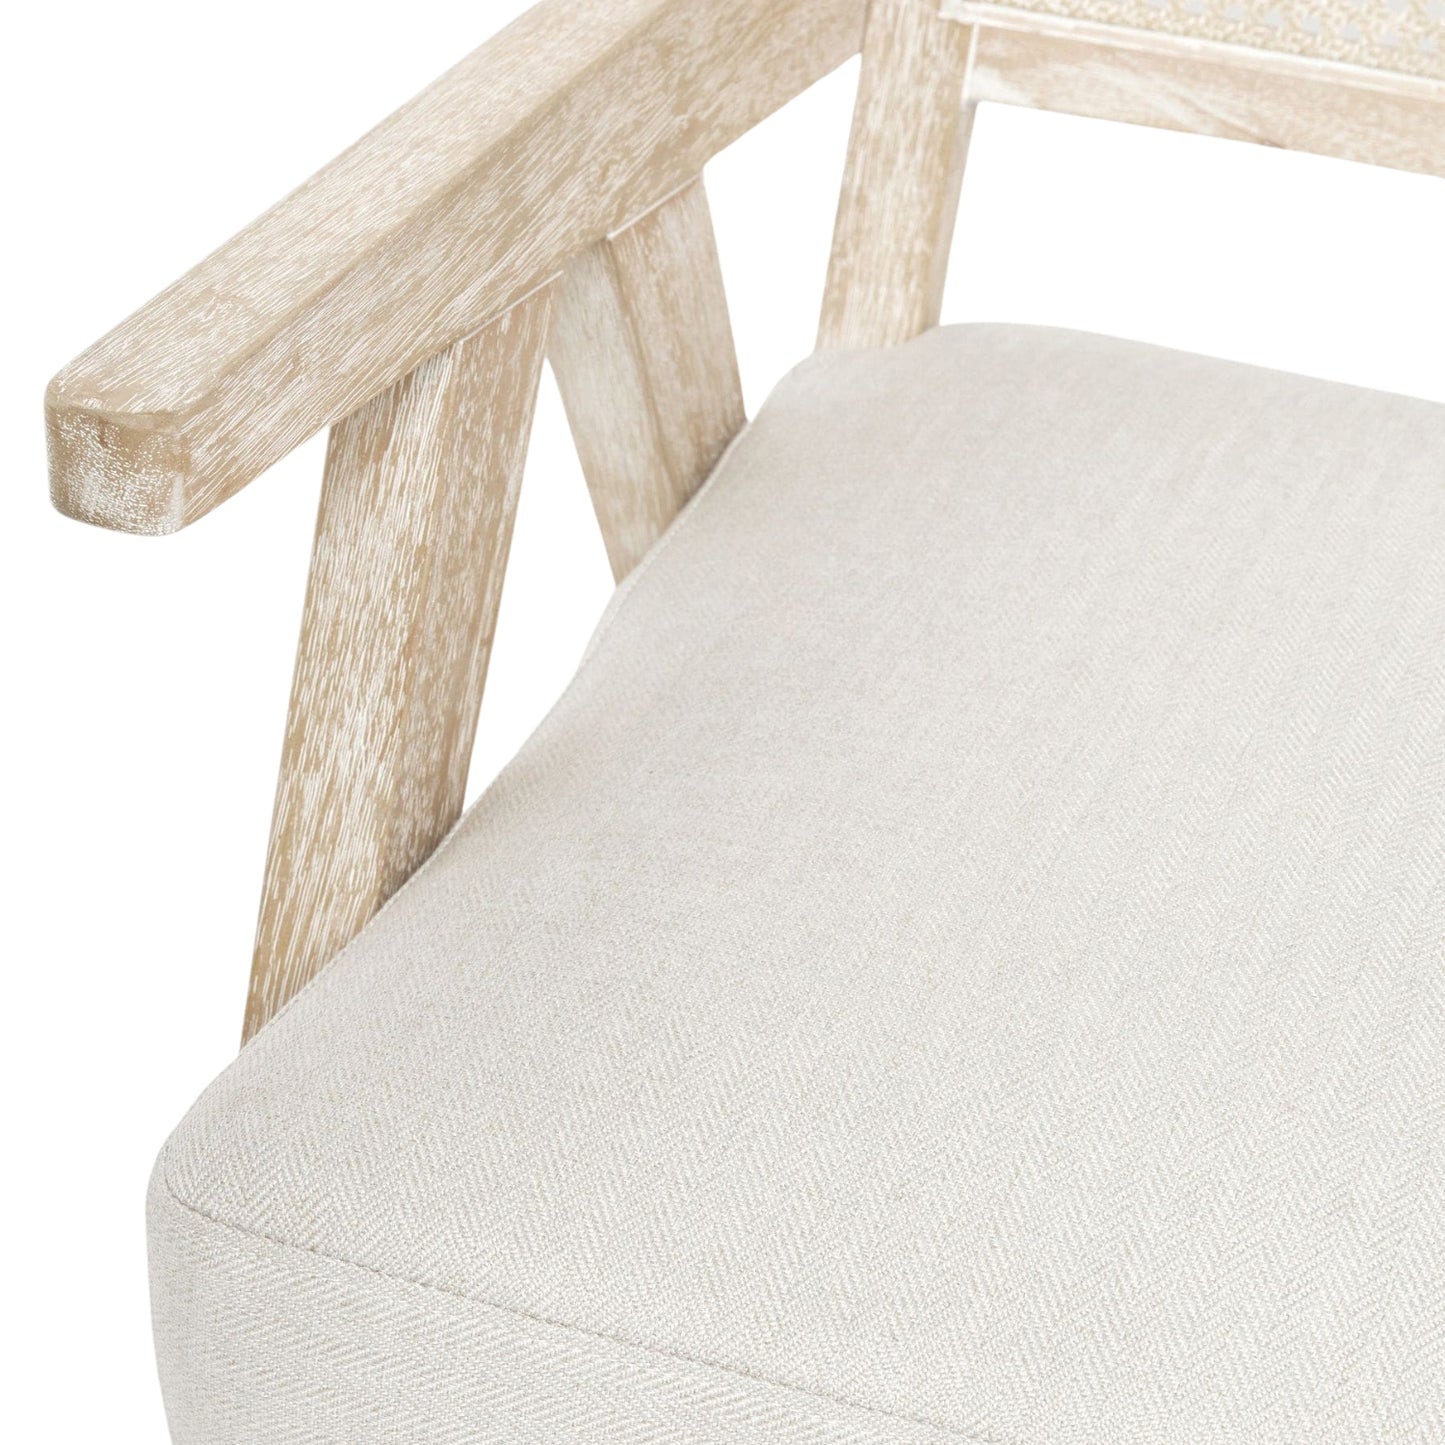 Abel Rattan Accent Chair - Lime Washed Oak Effect